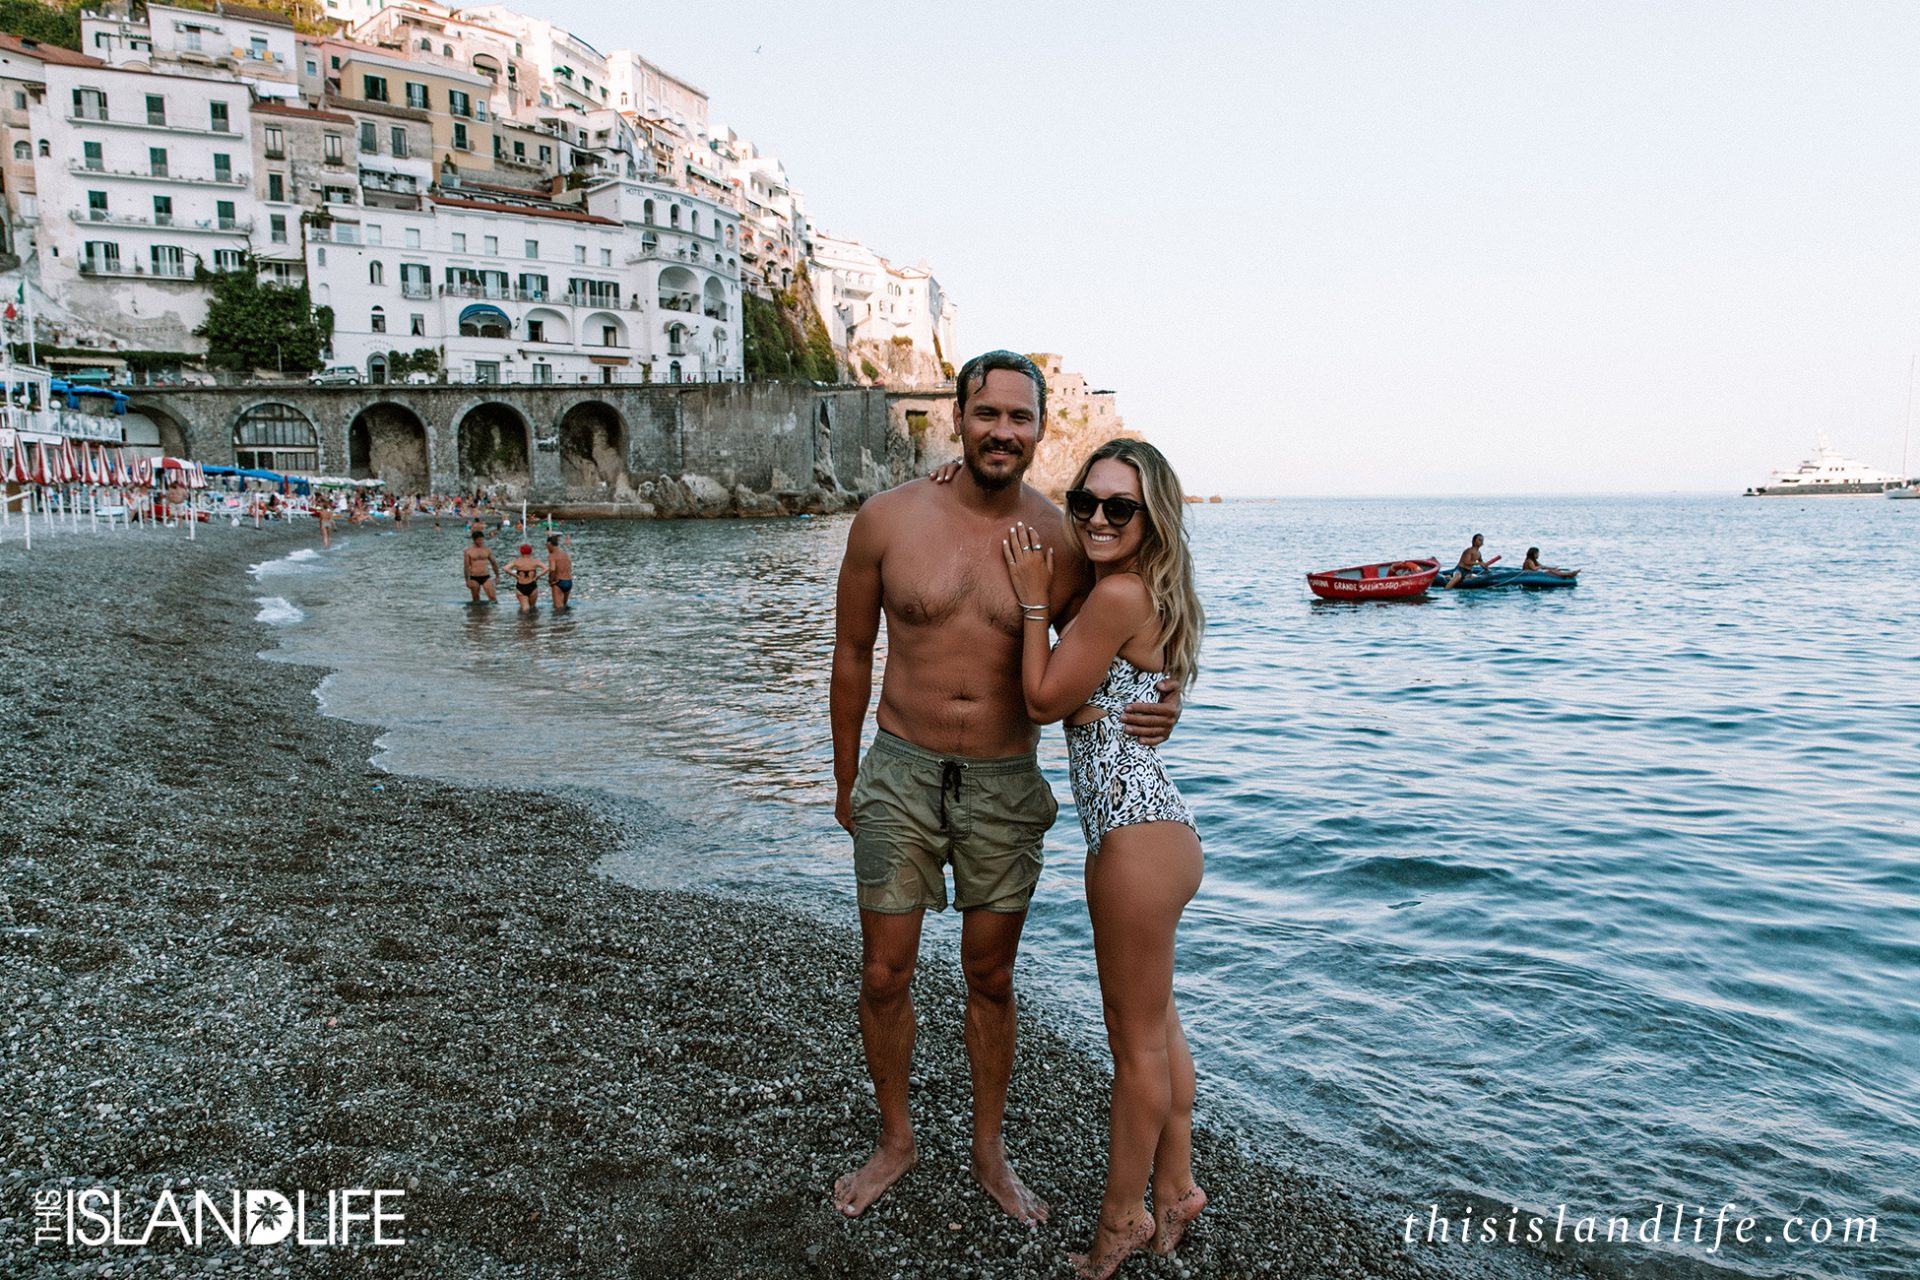 Travel blogger Laura McWhinnie from This Island Life shares her Our top 11 bikini destinations from 2017 including the Amalfi Coast.